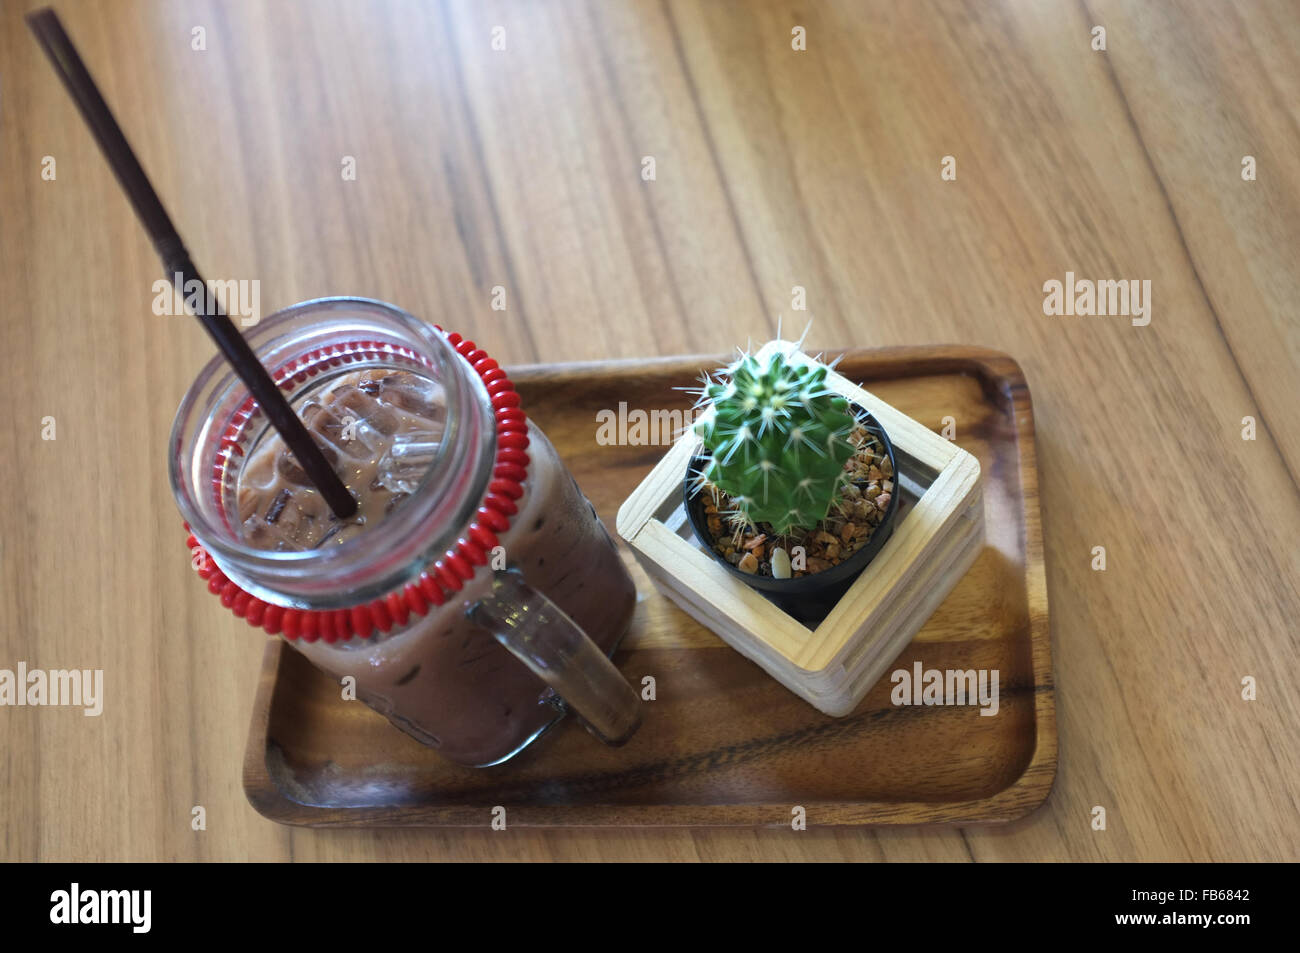 Ice coffee and cactus on wooden table Stock Photo